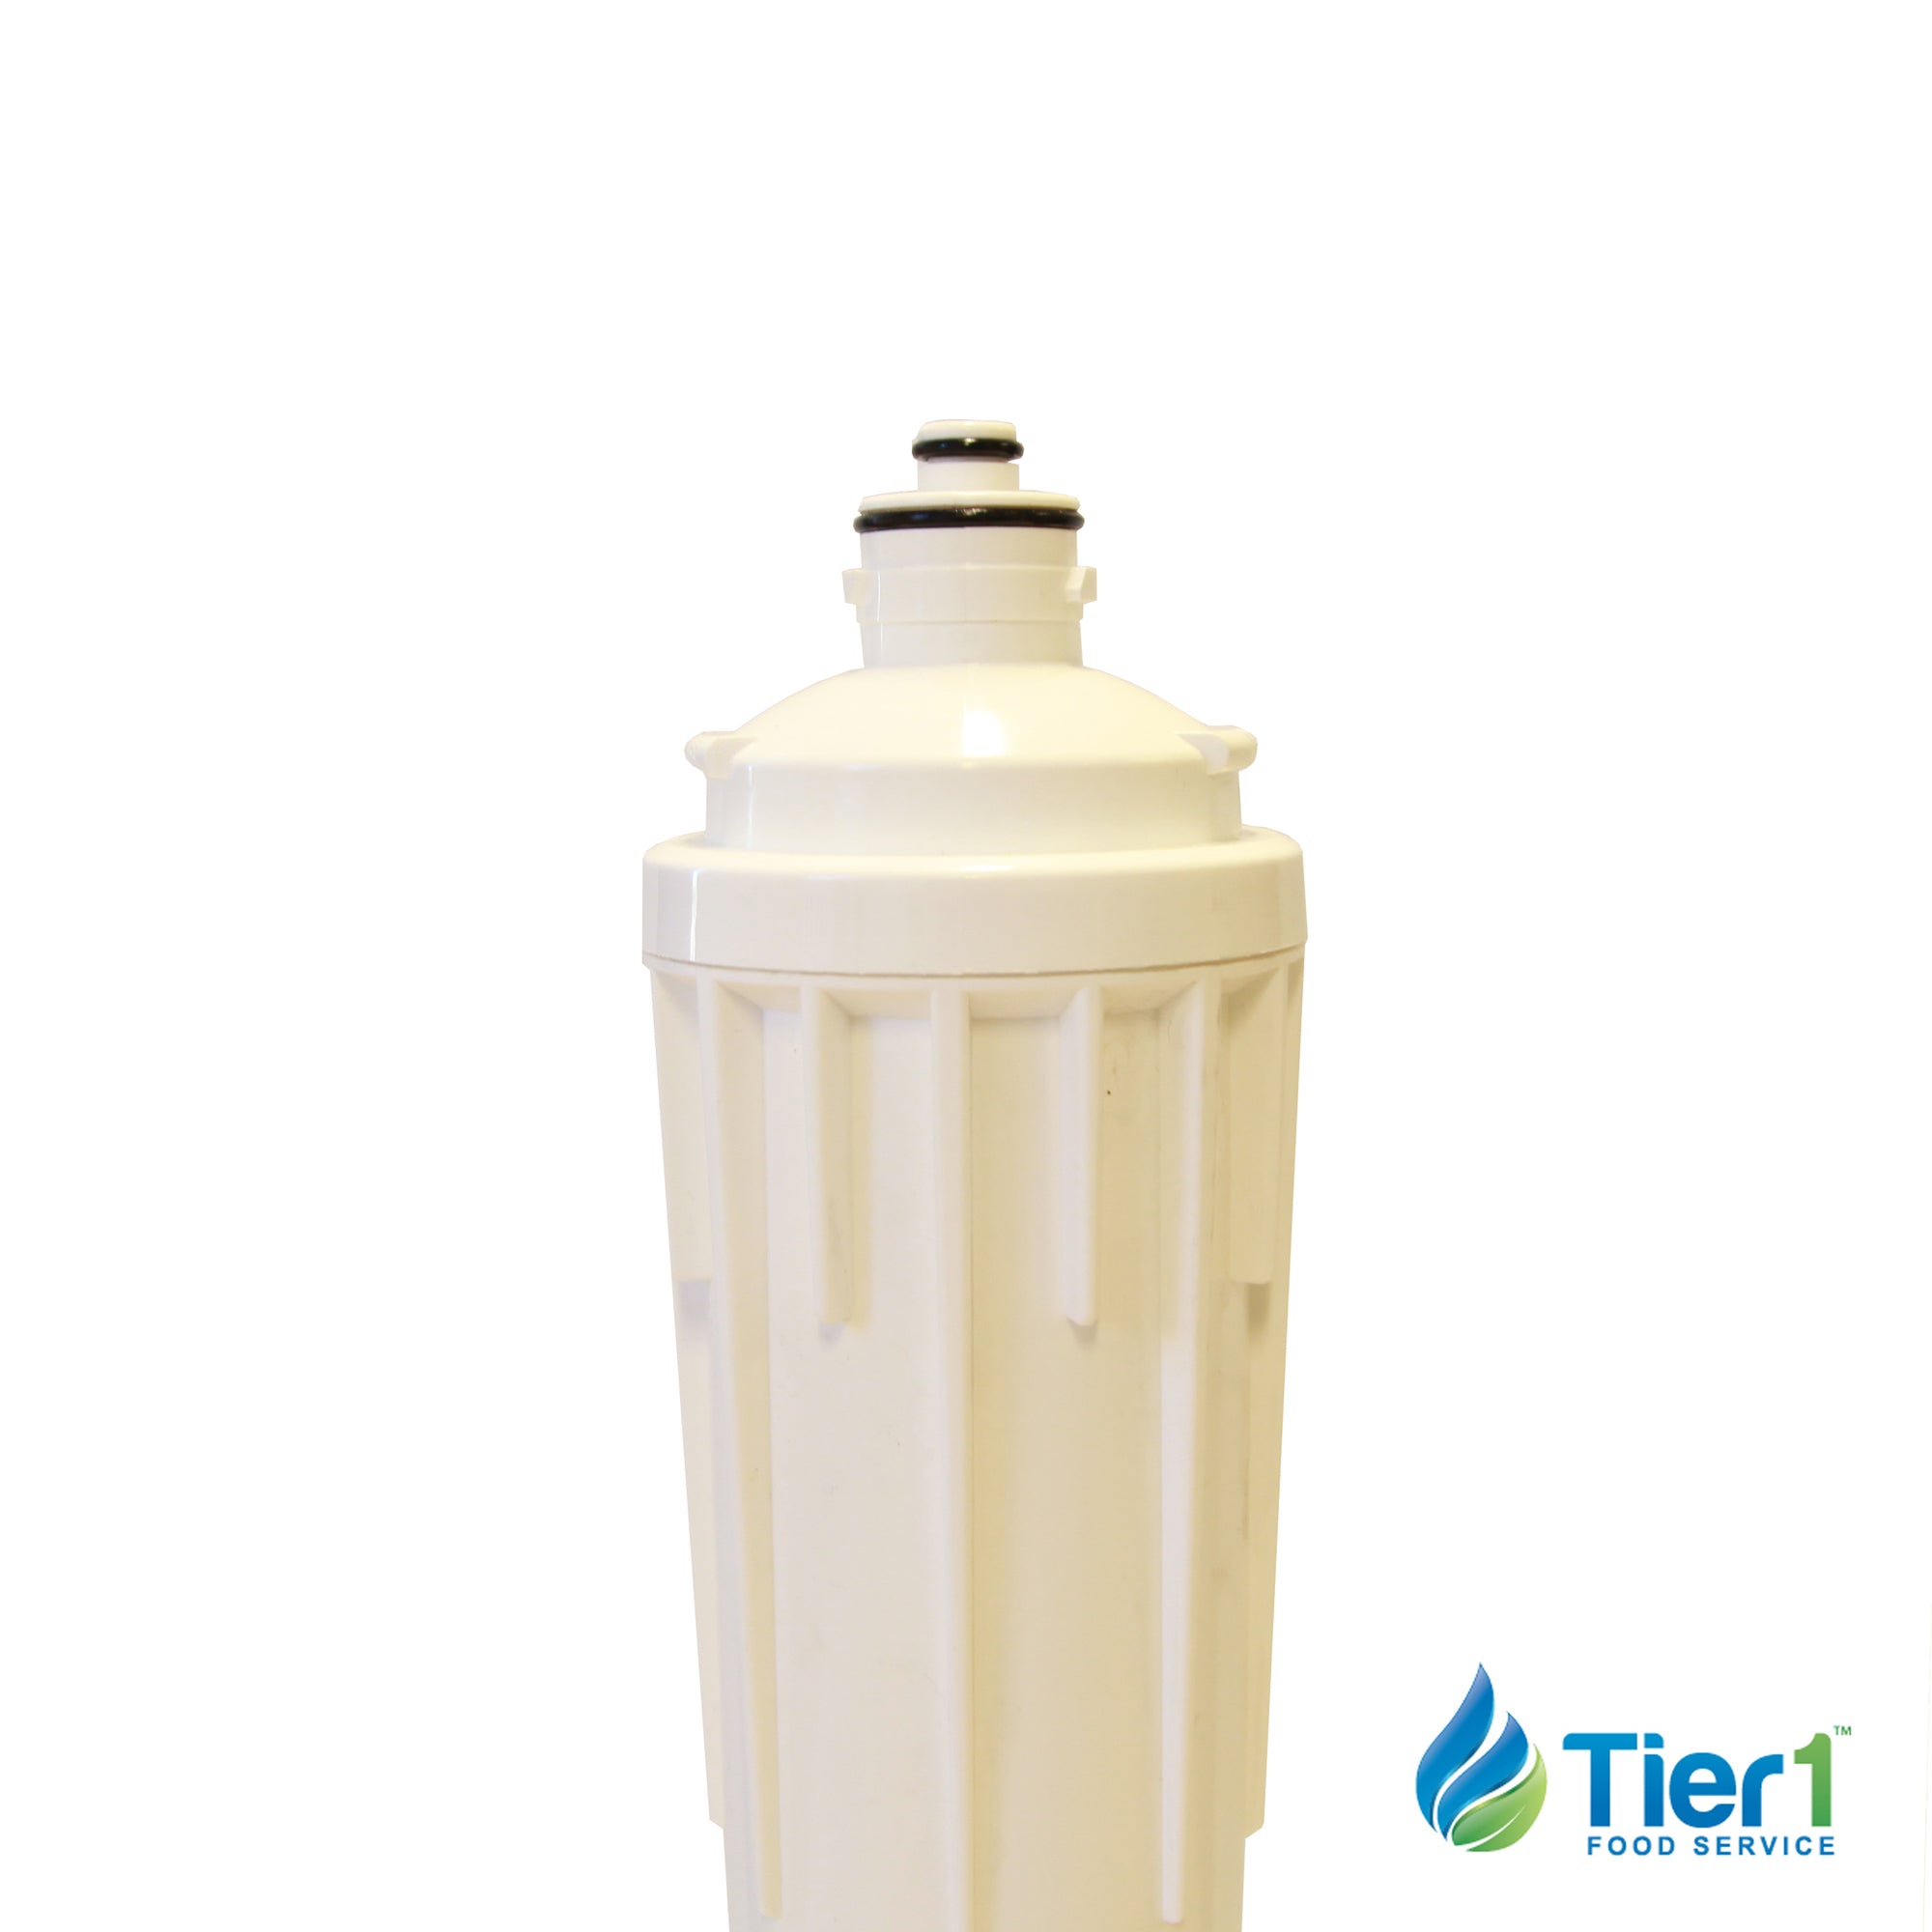 EV9612-56 Everpure Comparable Food Service Replacement Filter by Tier1